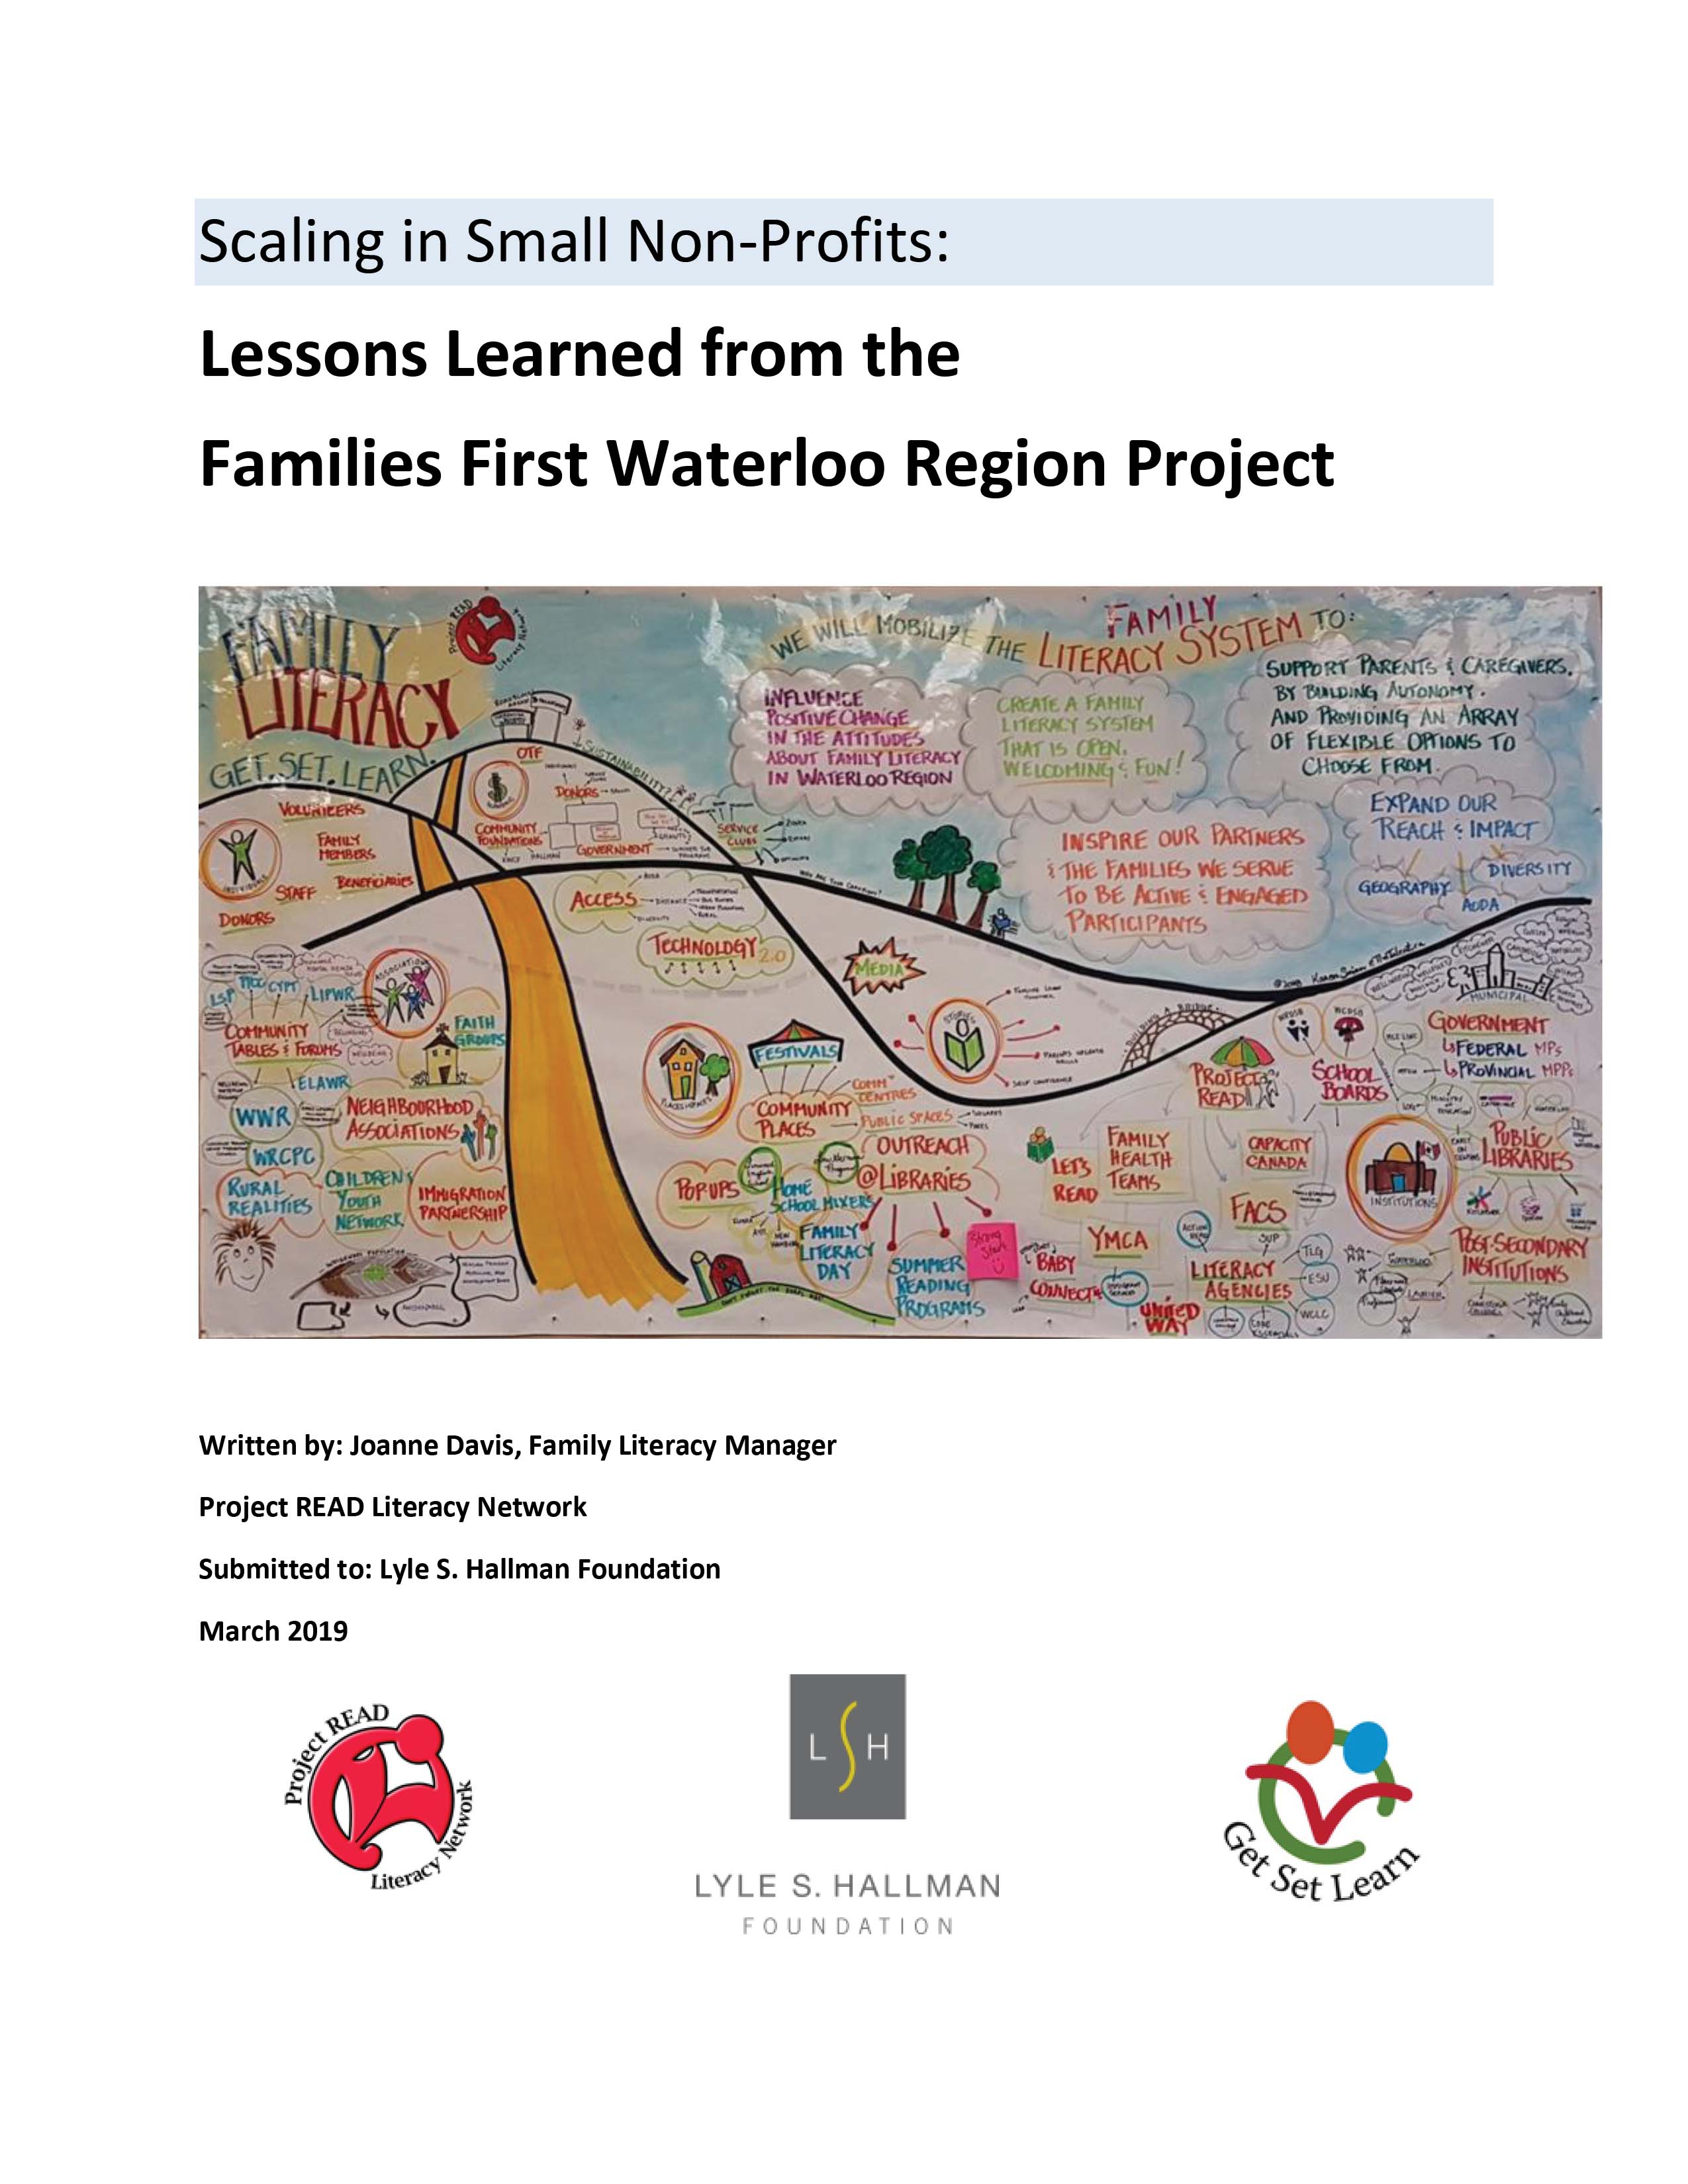 Scaling in Small Non-Profits Lessons Learned from the Families First Waterloo Region Project